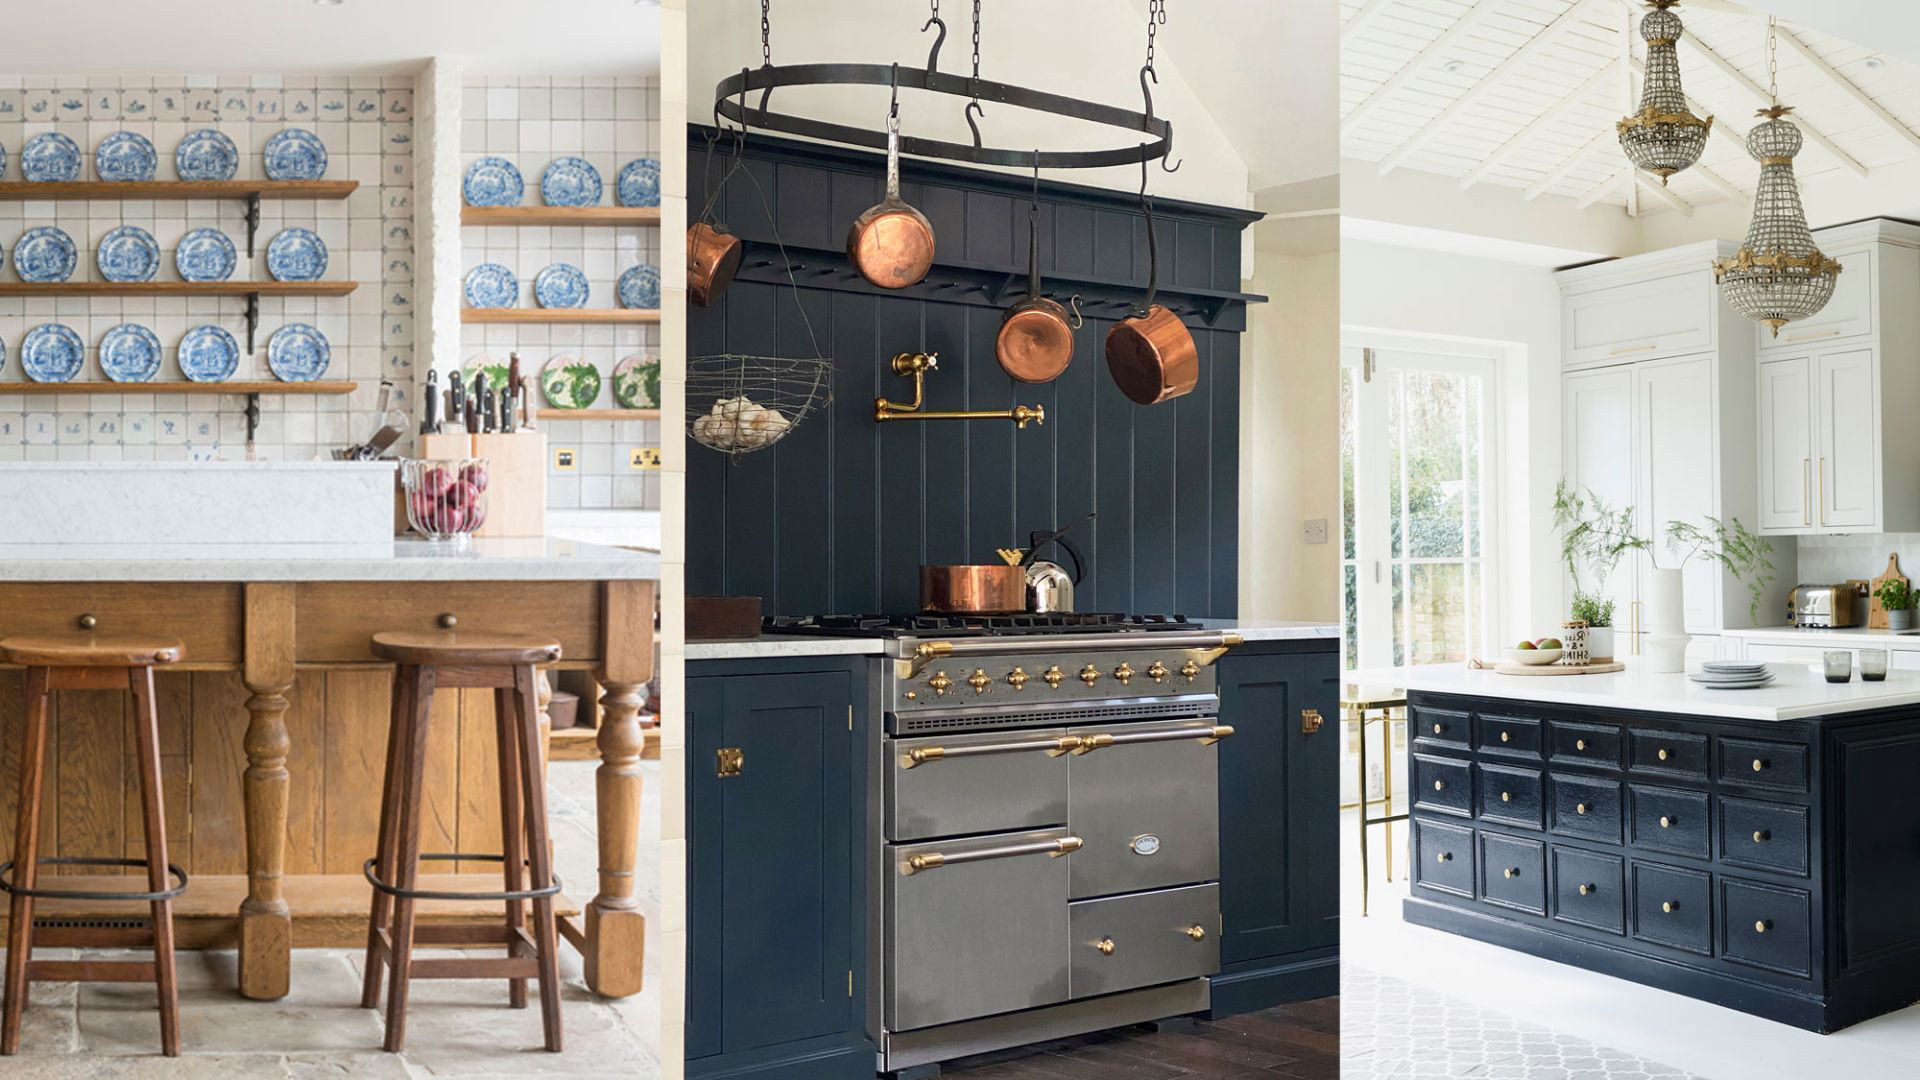 French country kitchen ideas – 48 designs with Gallic charm